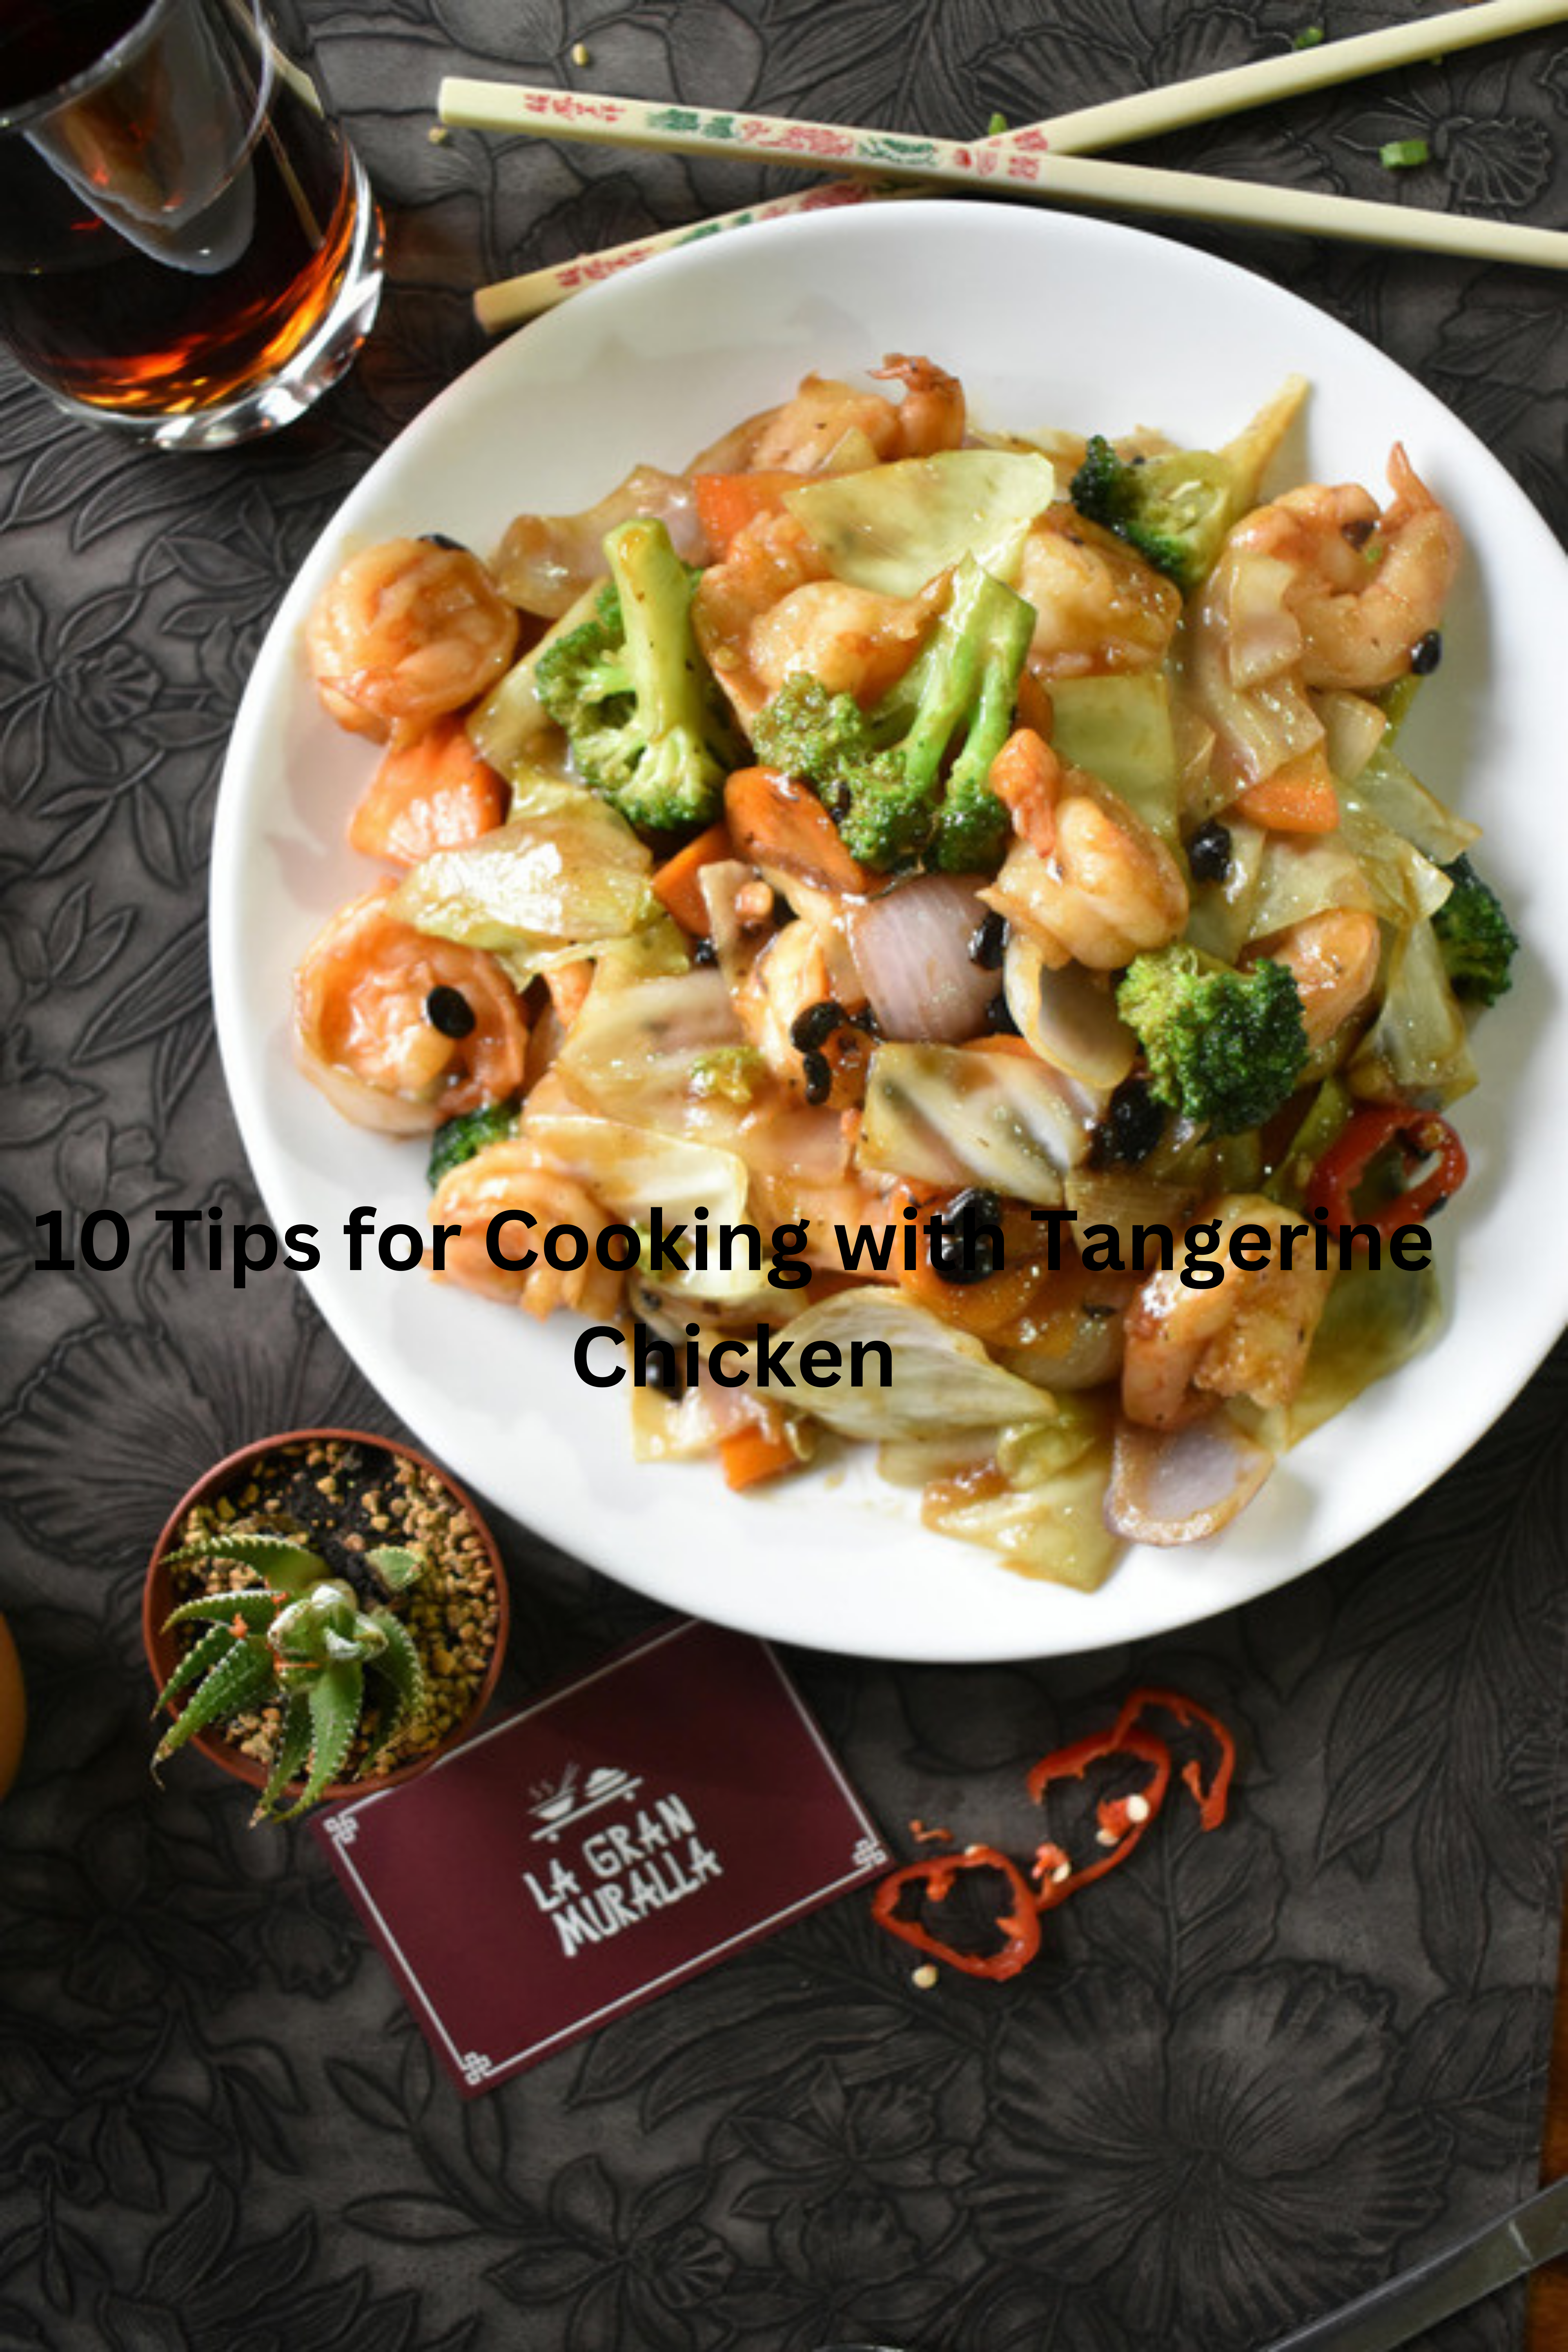 10 Tips for Cooking with Tangerine Chicken